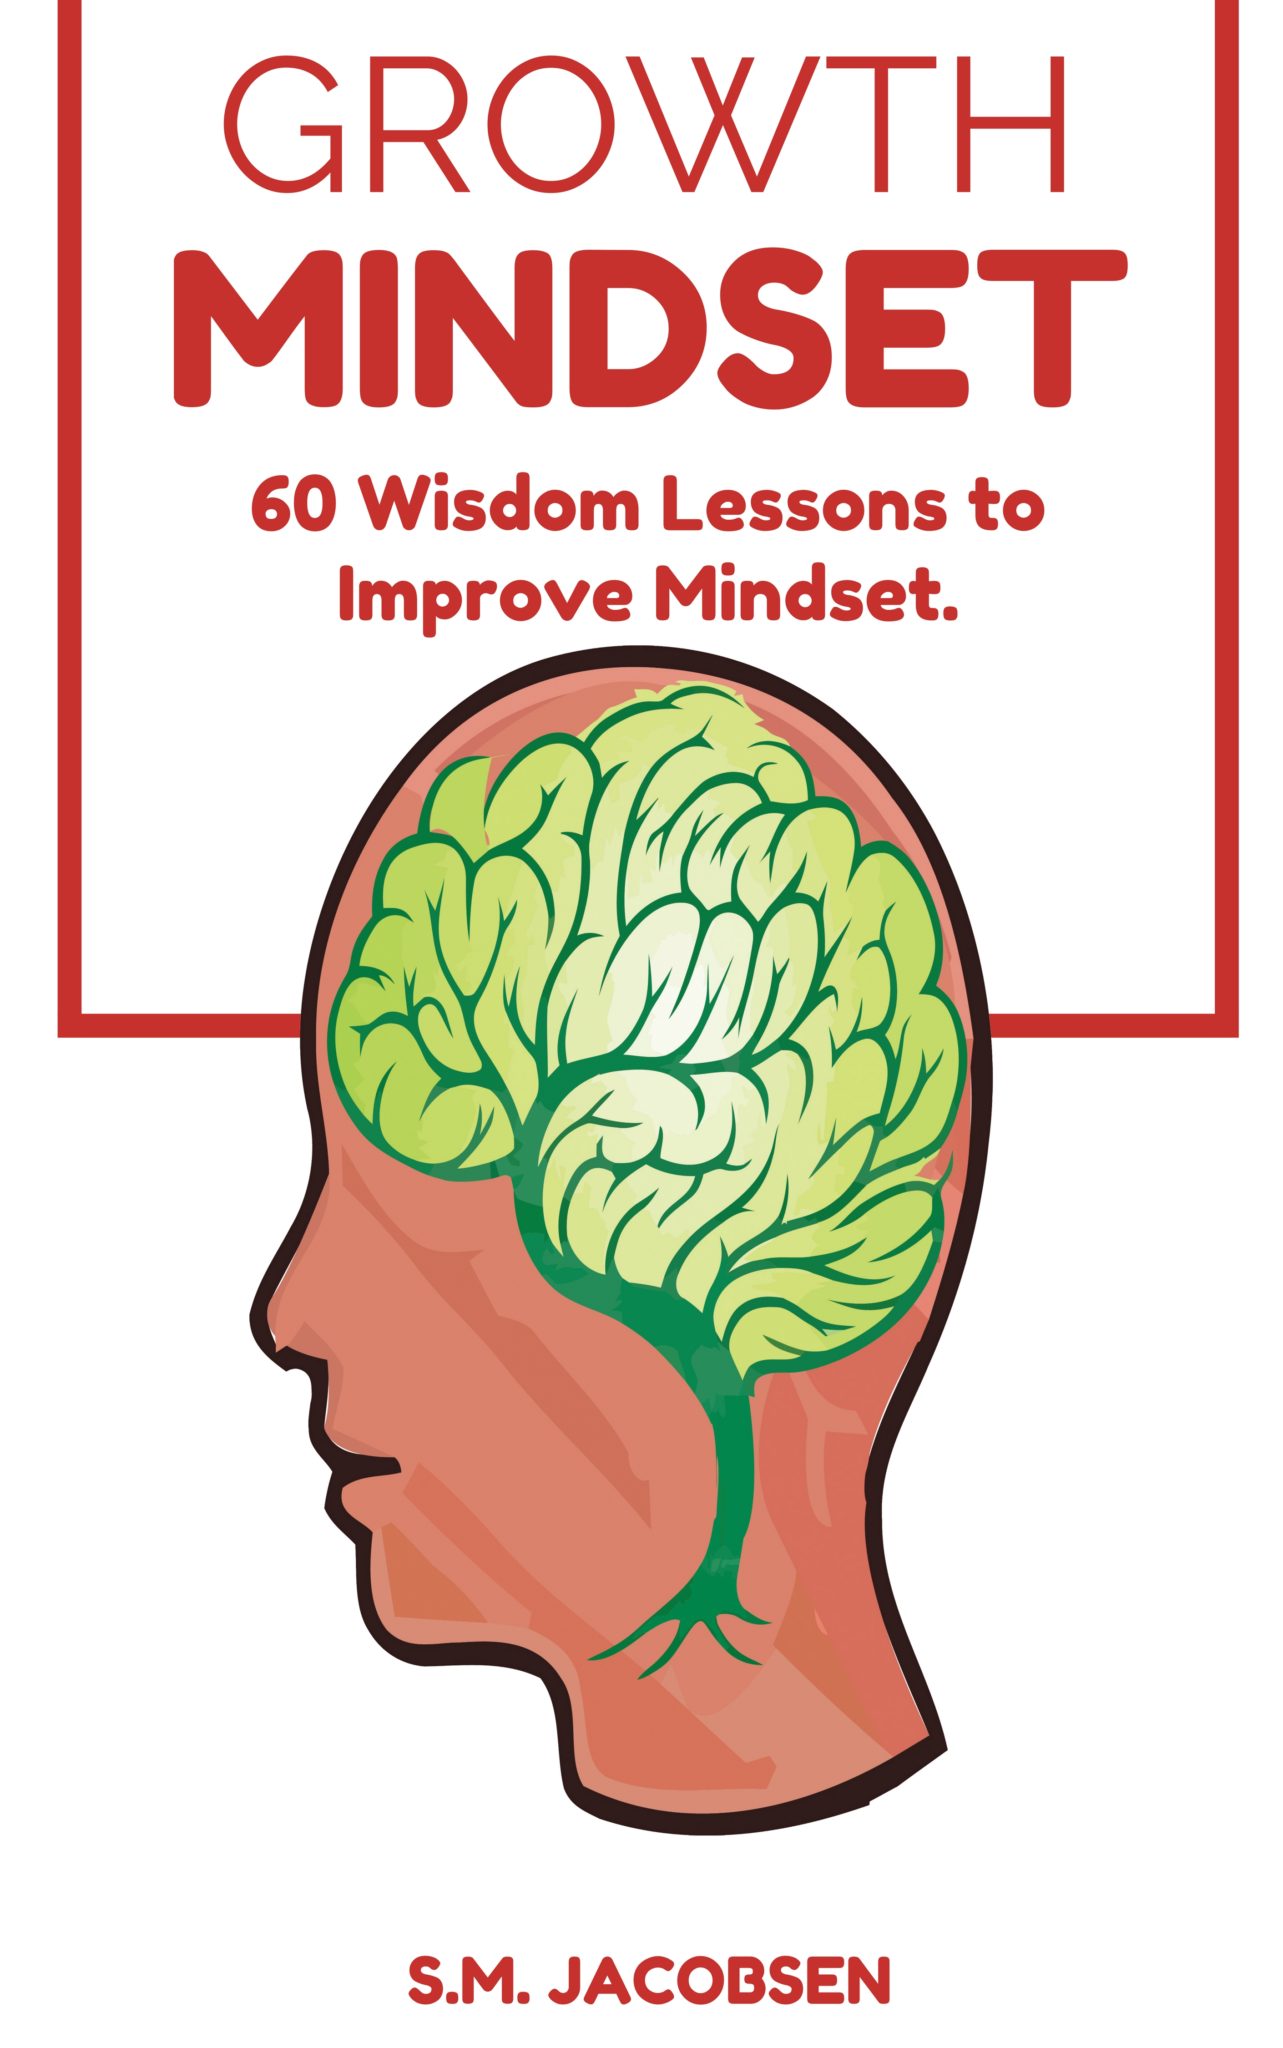 FREE: growth mindset by sharif jacobsen